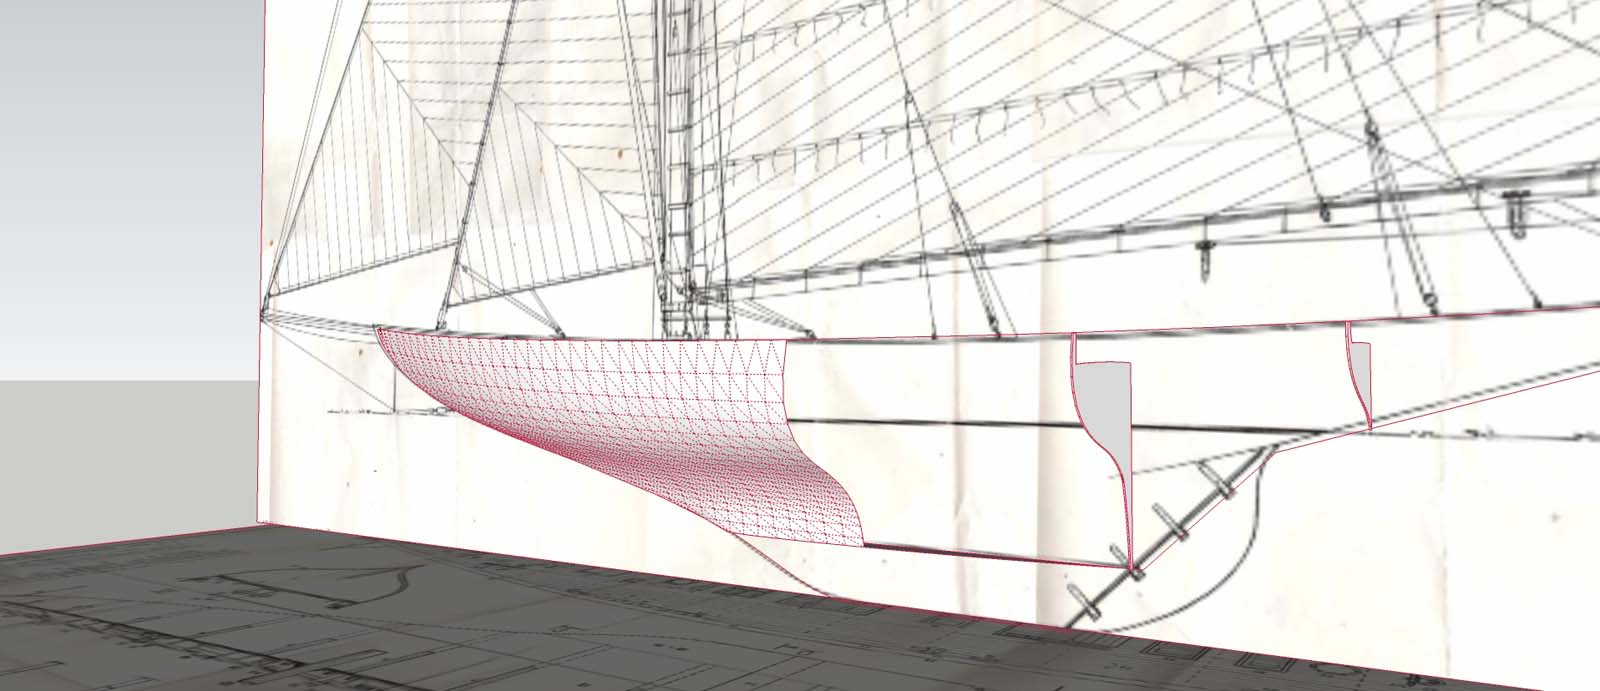 first half of the hull contour